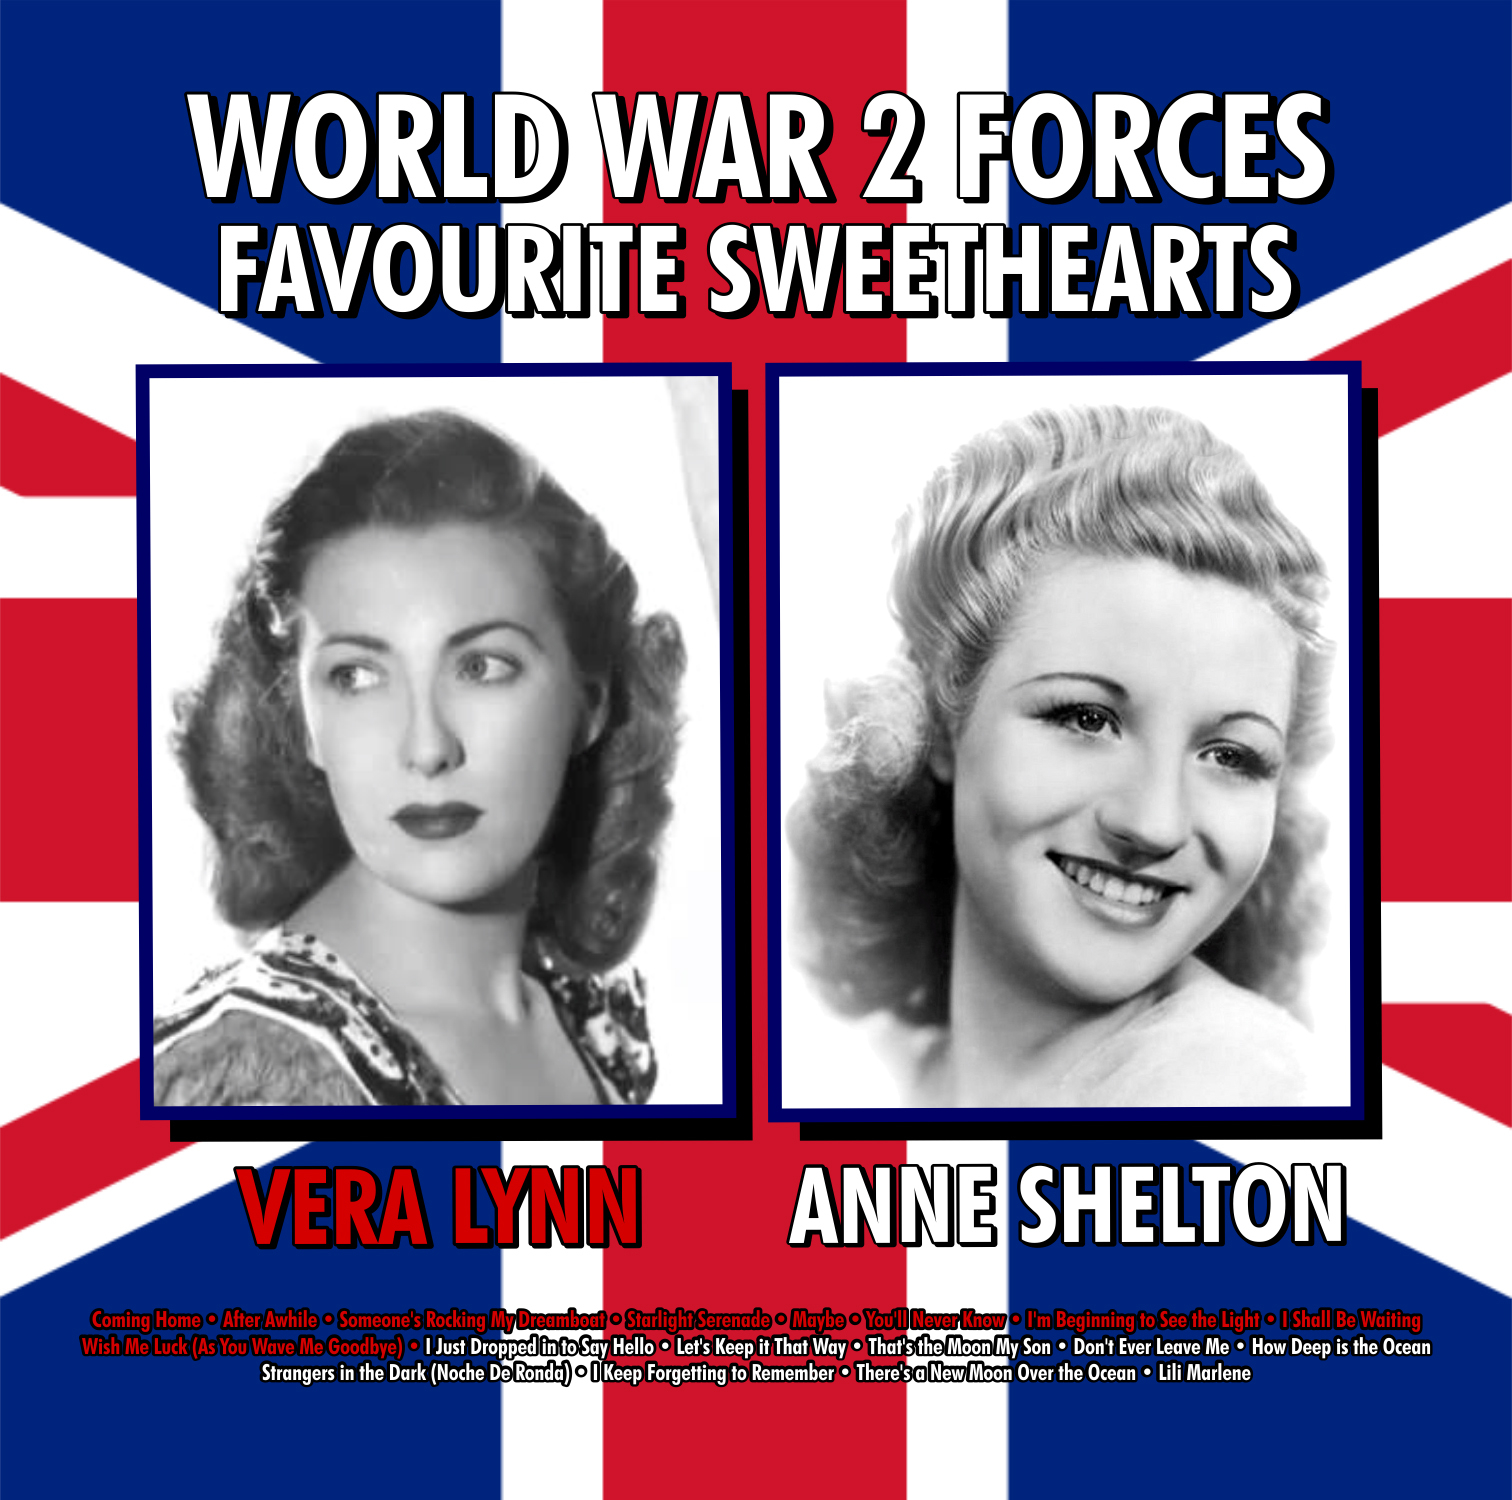 WW2 Forces Favourite Sweethearts